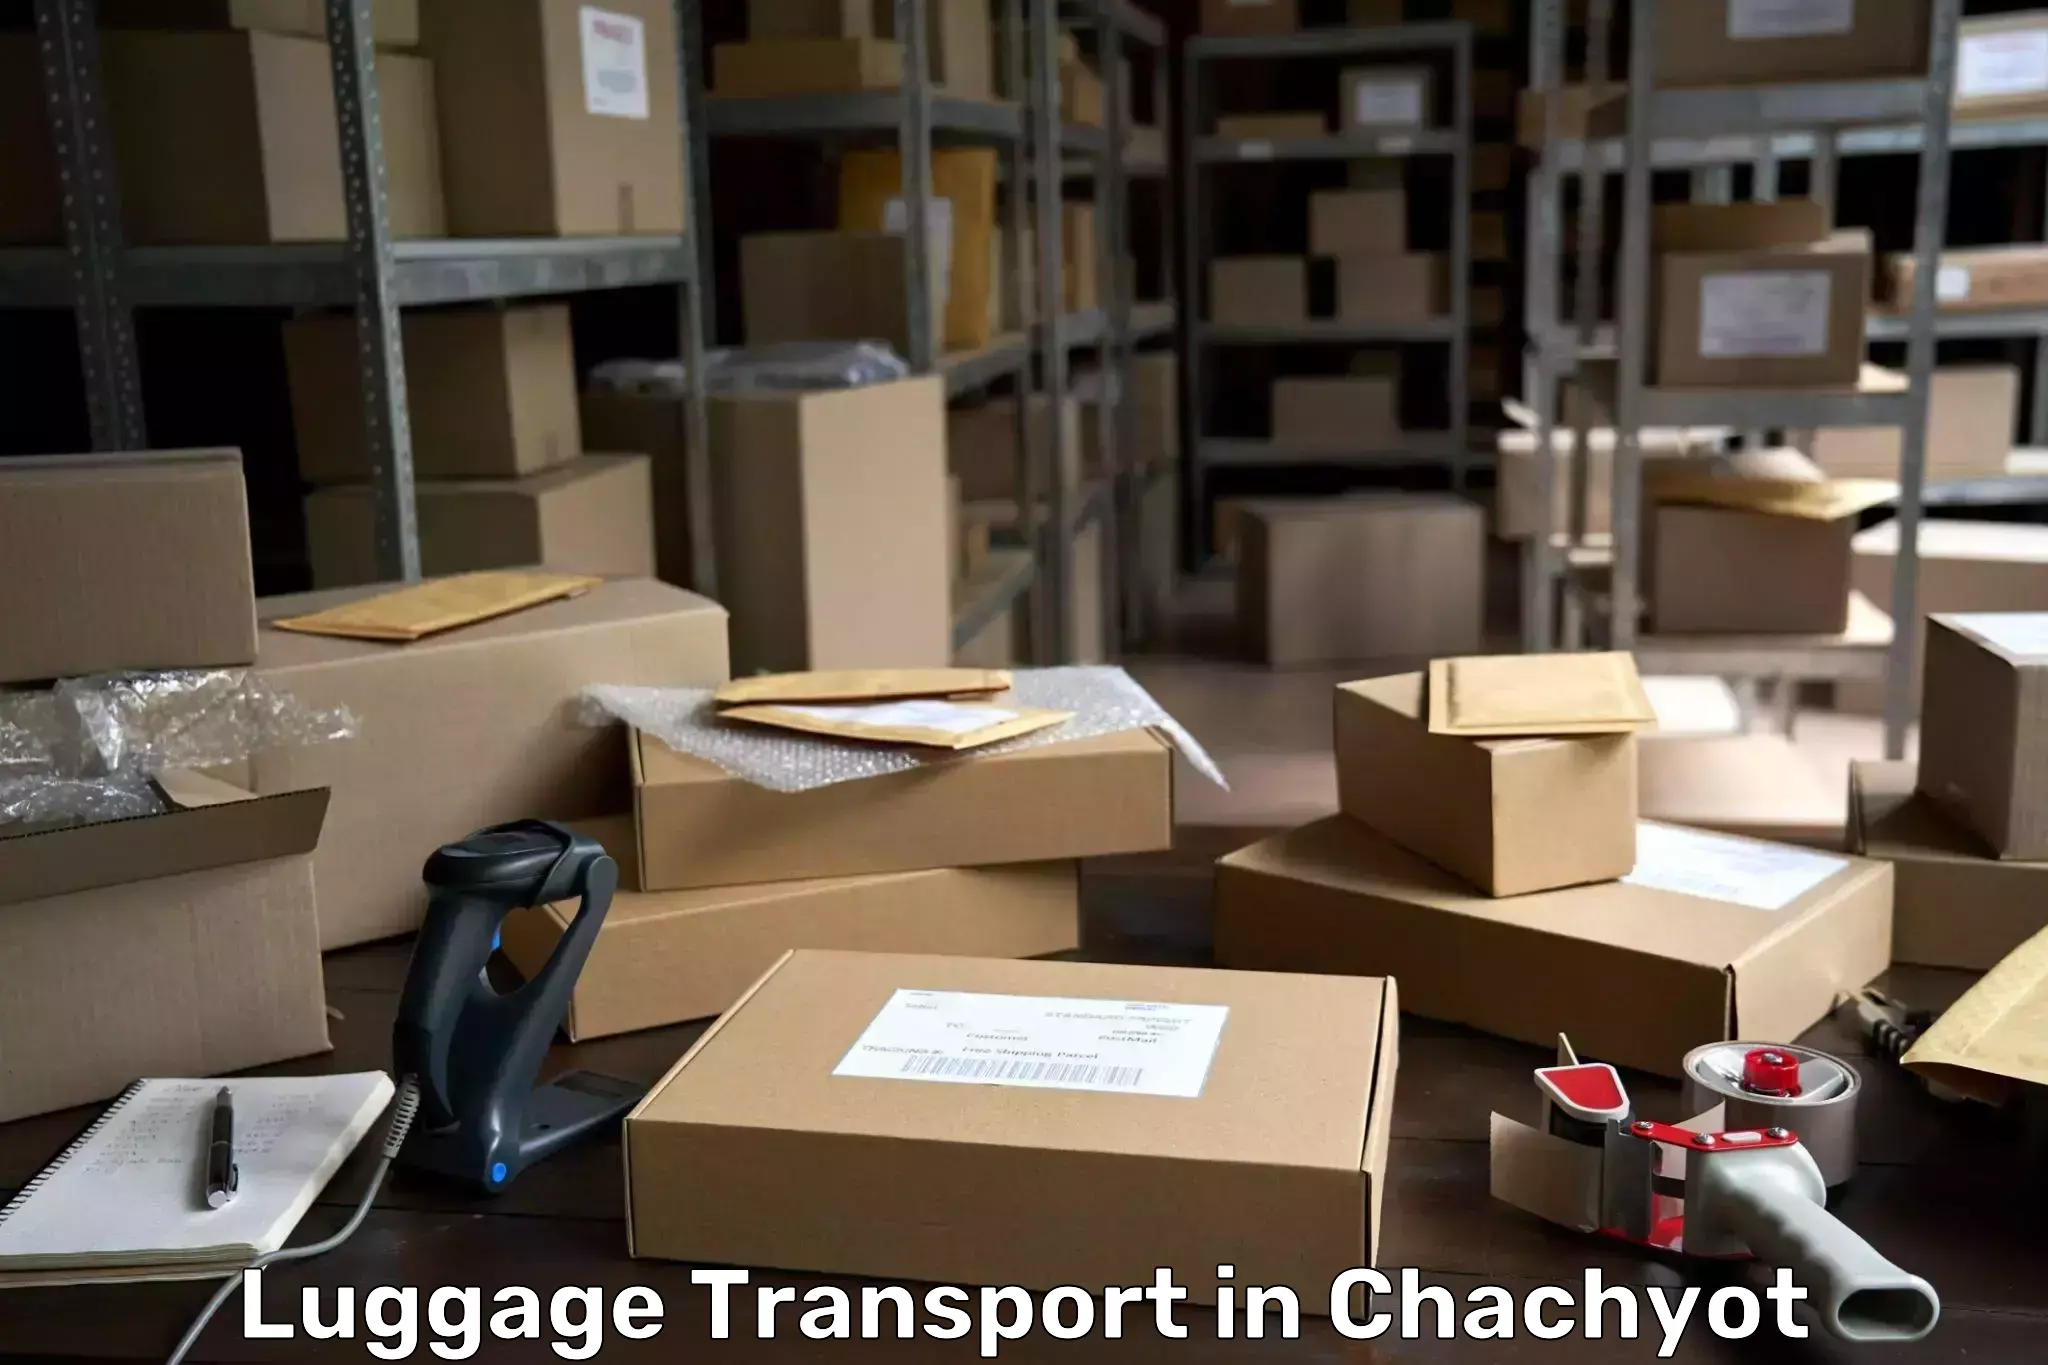 Multi-destination luggage transport in Chachyot